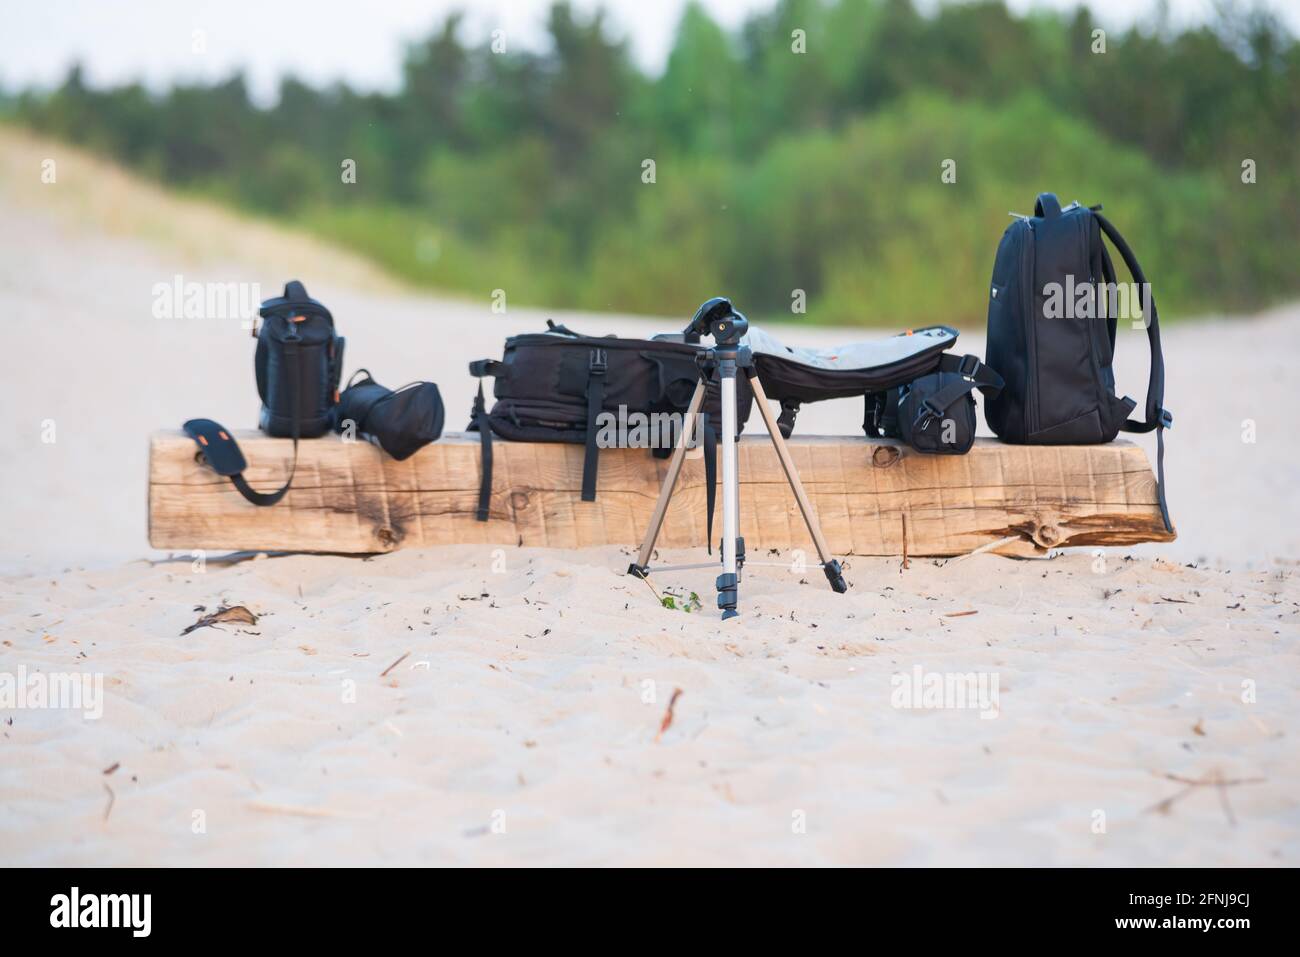 Photographic equipment - photo bag, stand on the sea shore in the dune sand on a wooden board bench. Stock Photo